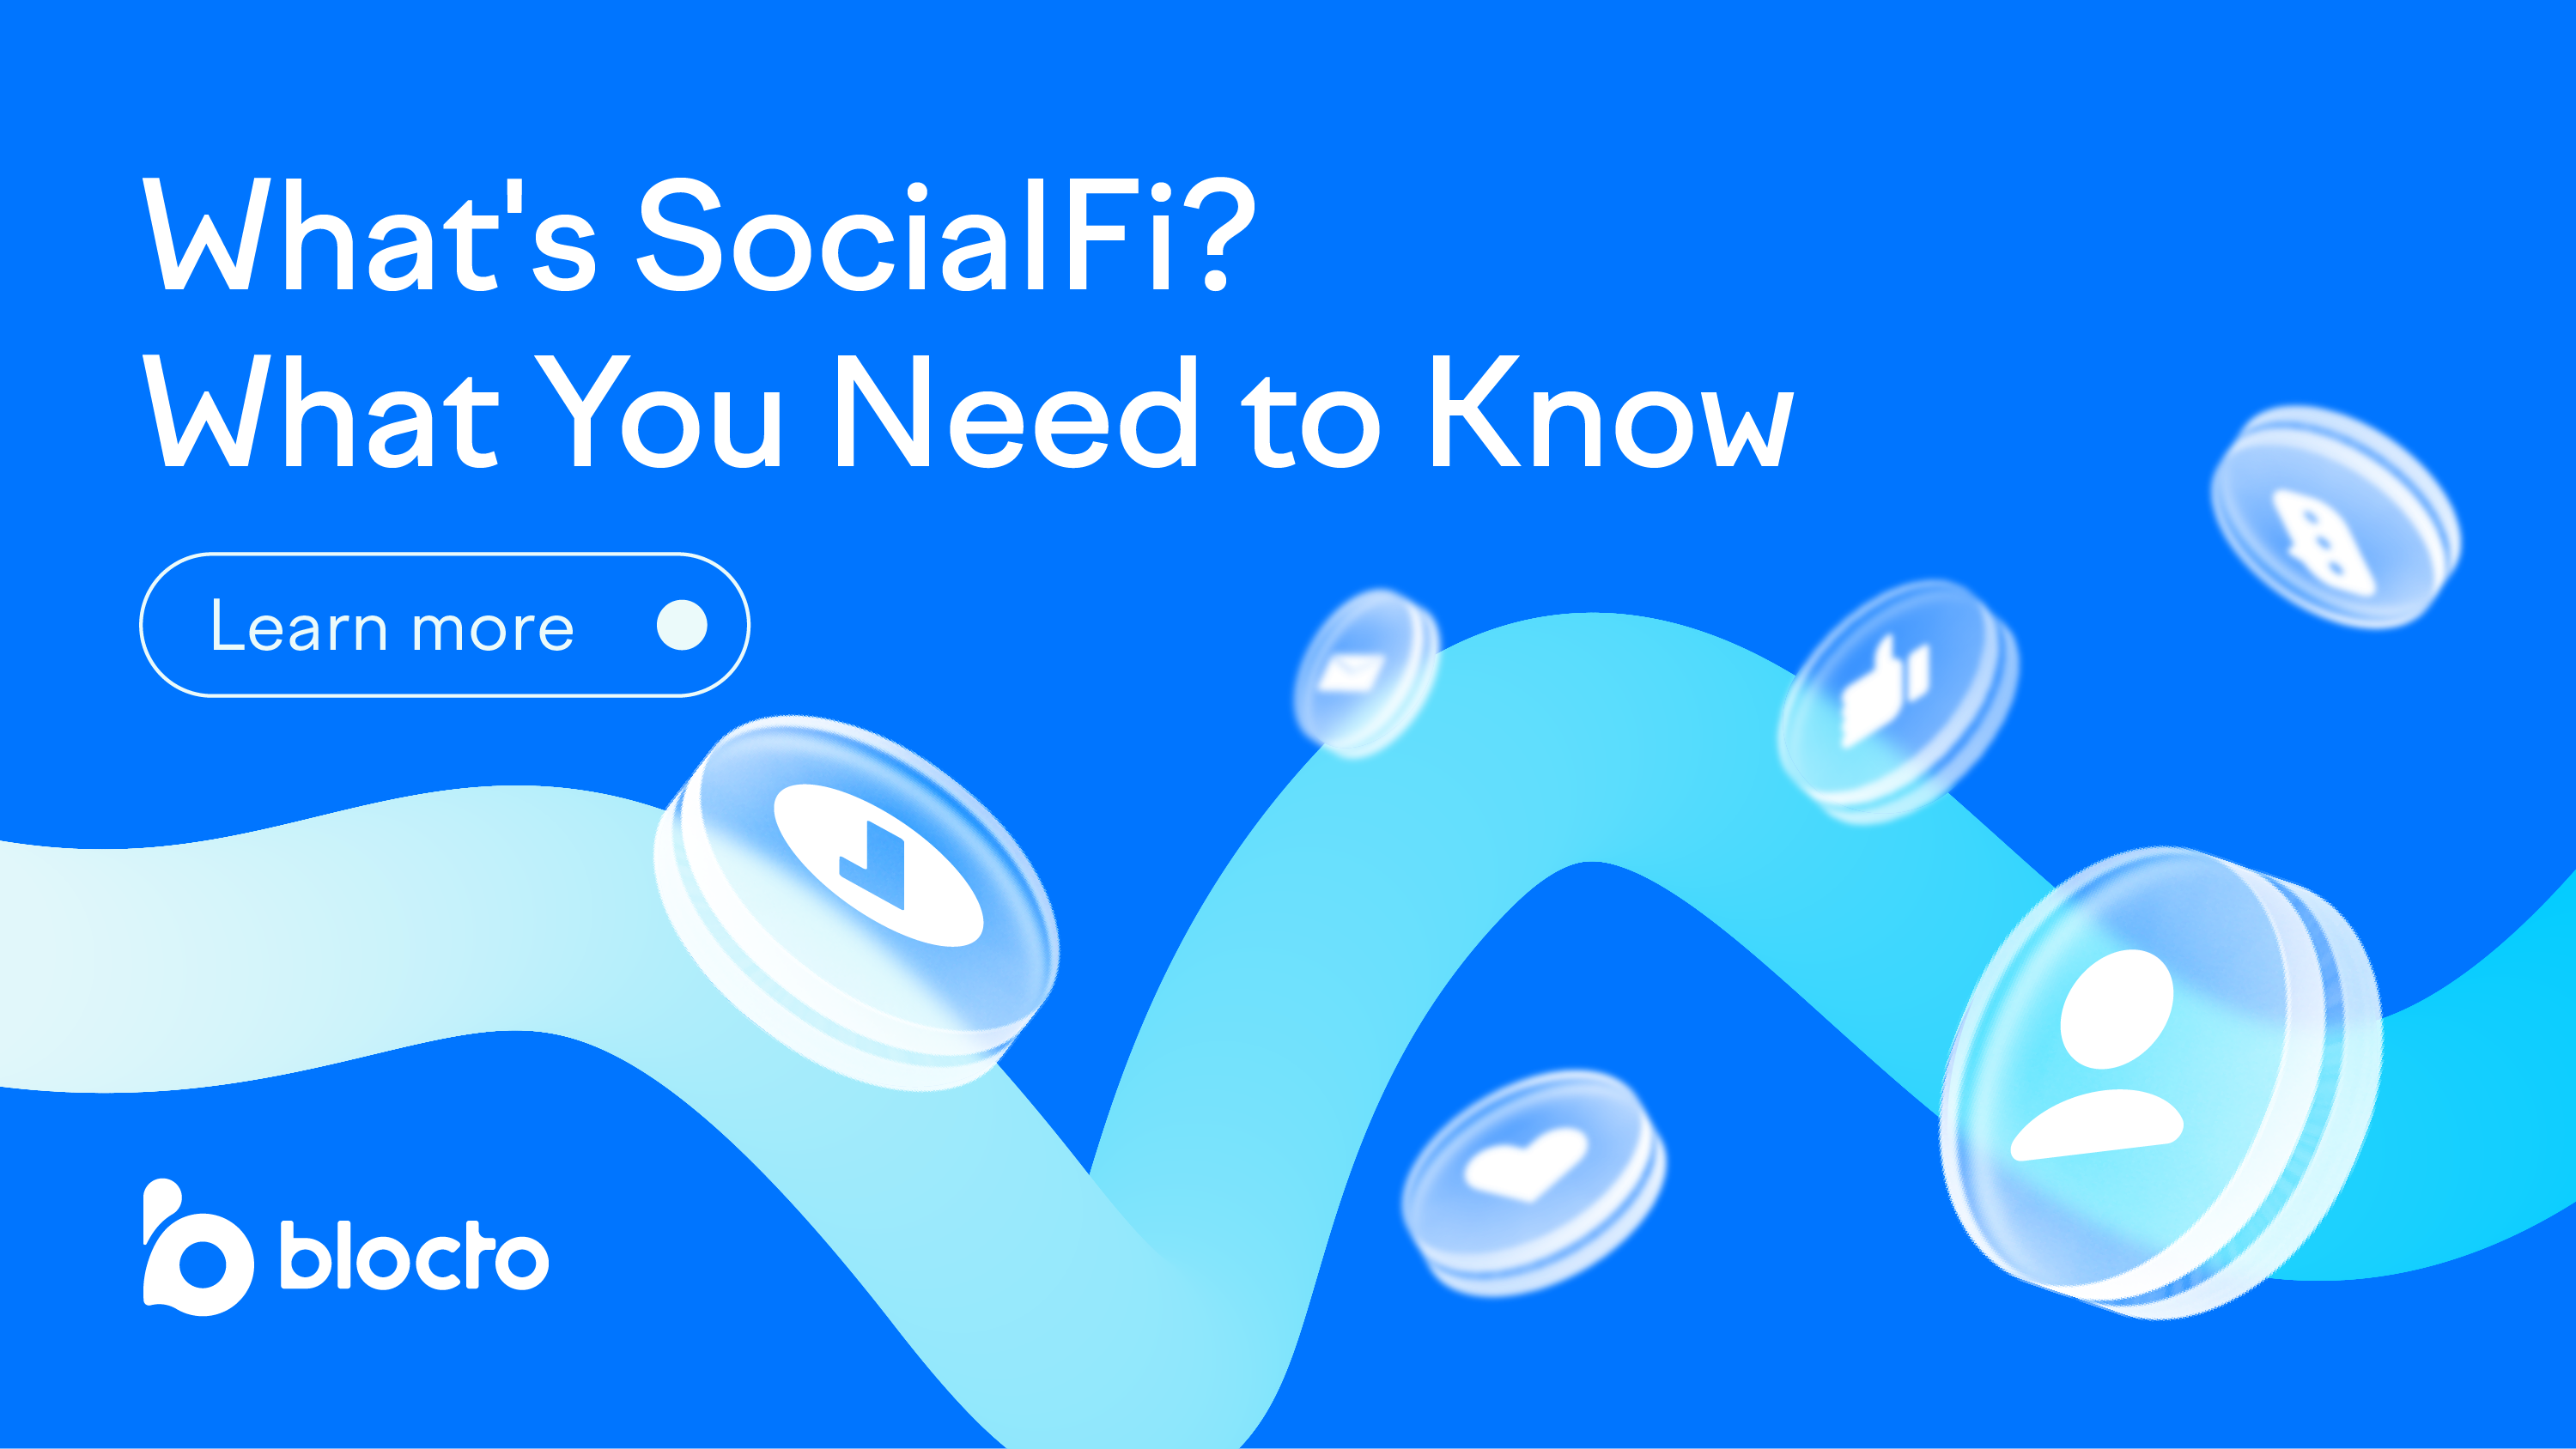 What is socialfi? socialfi projects and coins